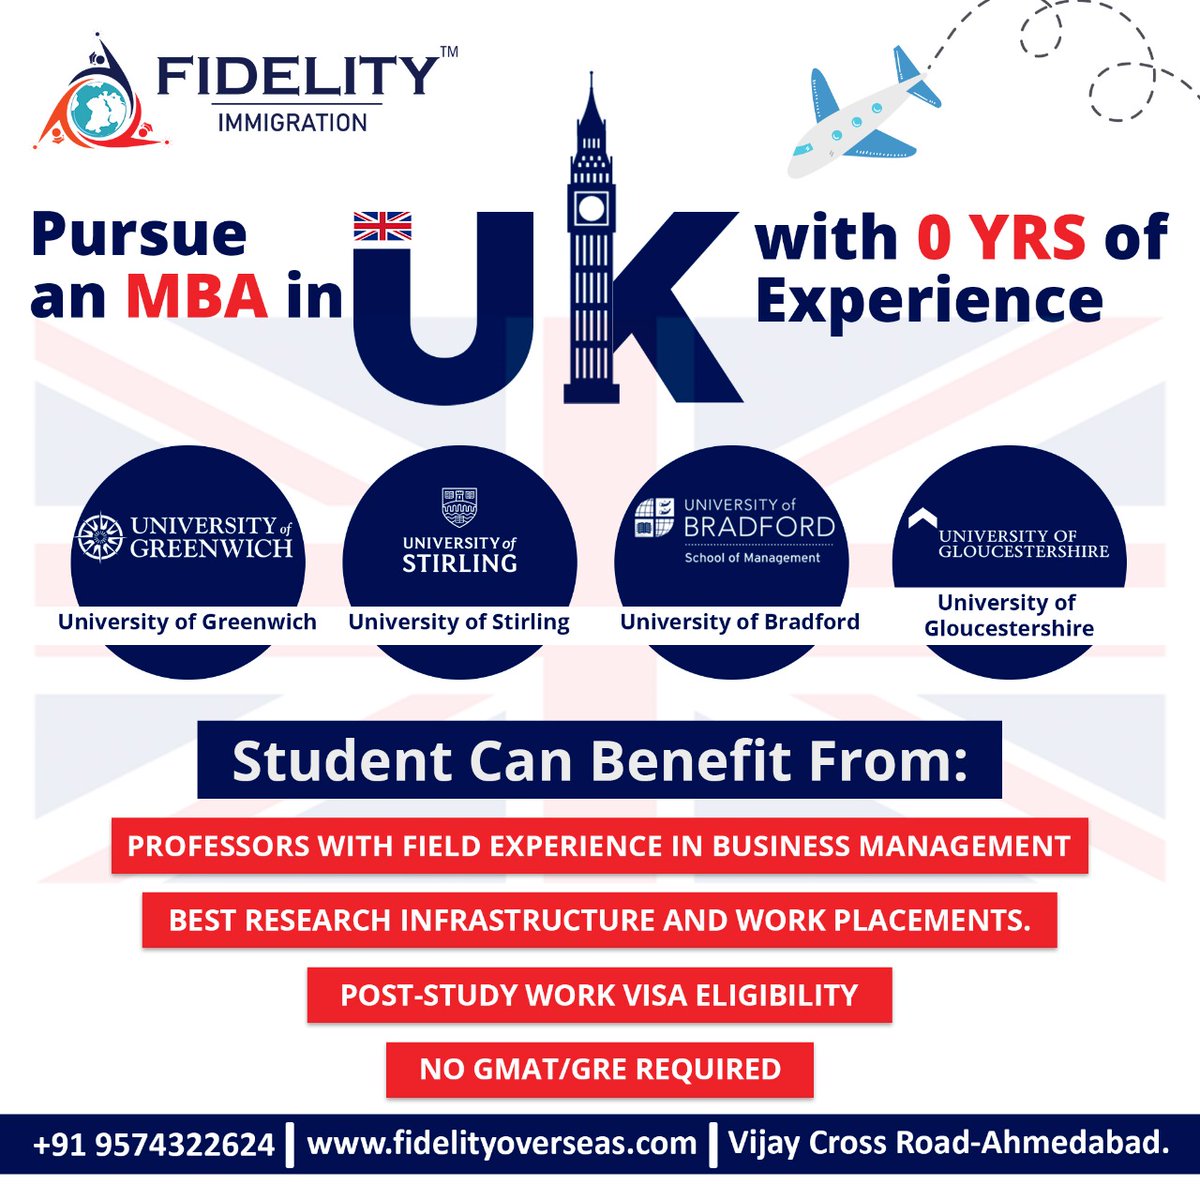 Plan your study in UK With Scholarship-Fidelity Scholarship.

Connect with the Fidelity Immigration team and get ready for your study in United Kingdom.

#mba #ukmba #mbainuk #planmba #zeroexperince #indiamba #fidelityimmigration #fidelityahmedabad #ahmedabad #ieltscentre